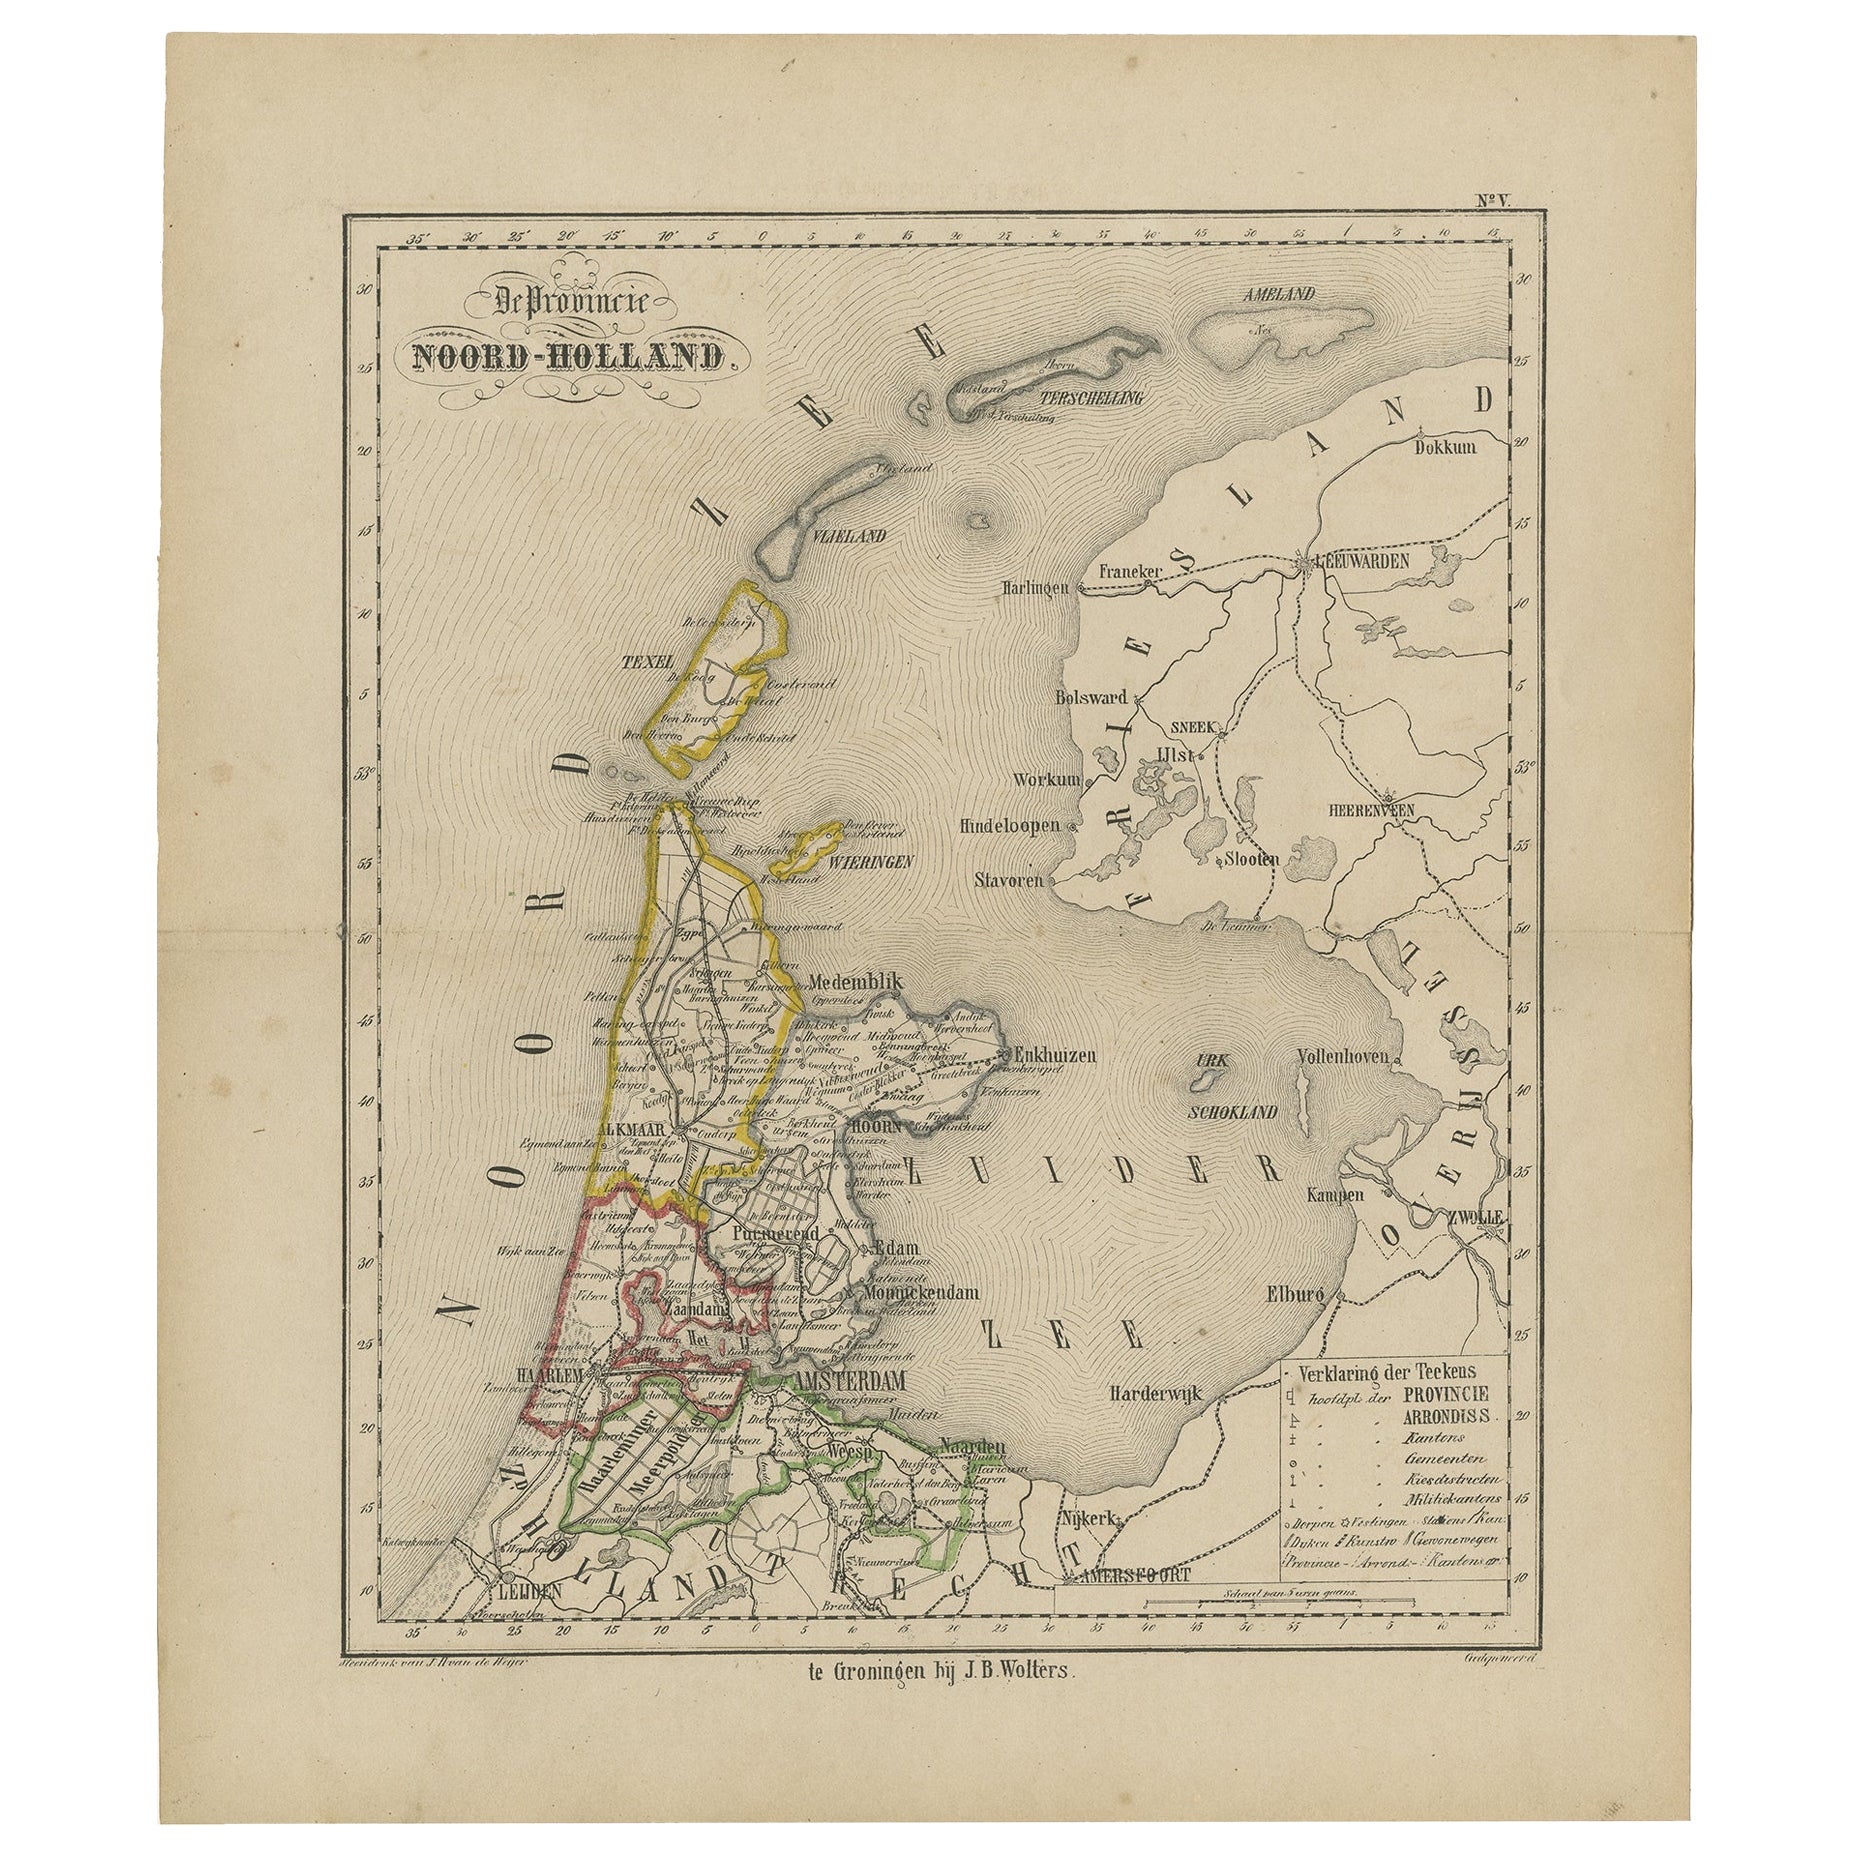 Antique Map of The Province Noord-Holland in The Netherlands, 1864